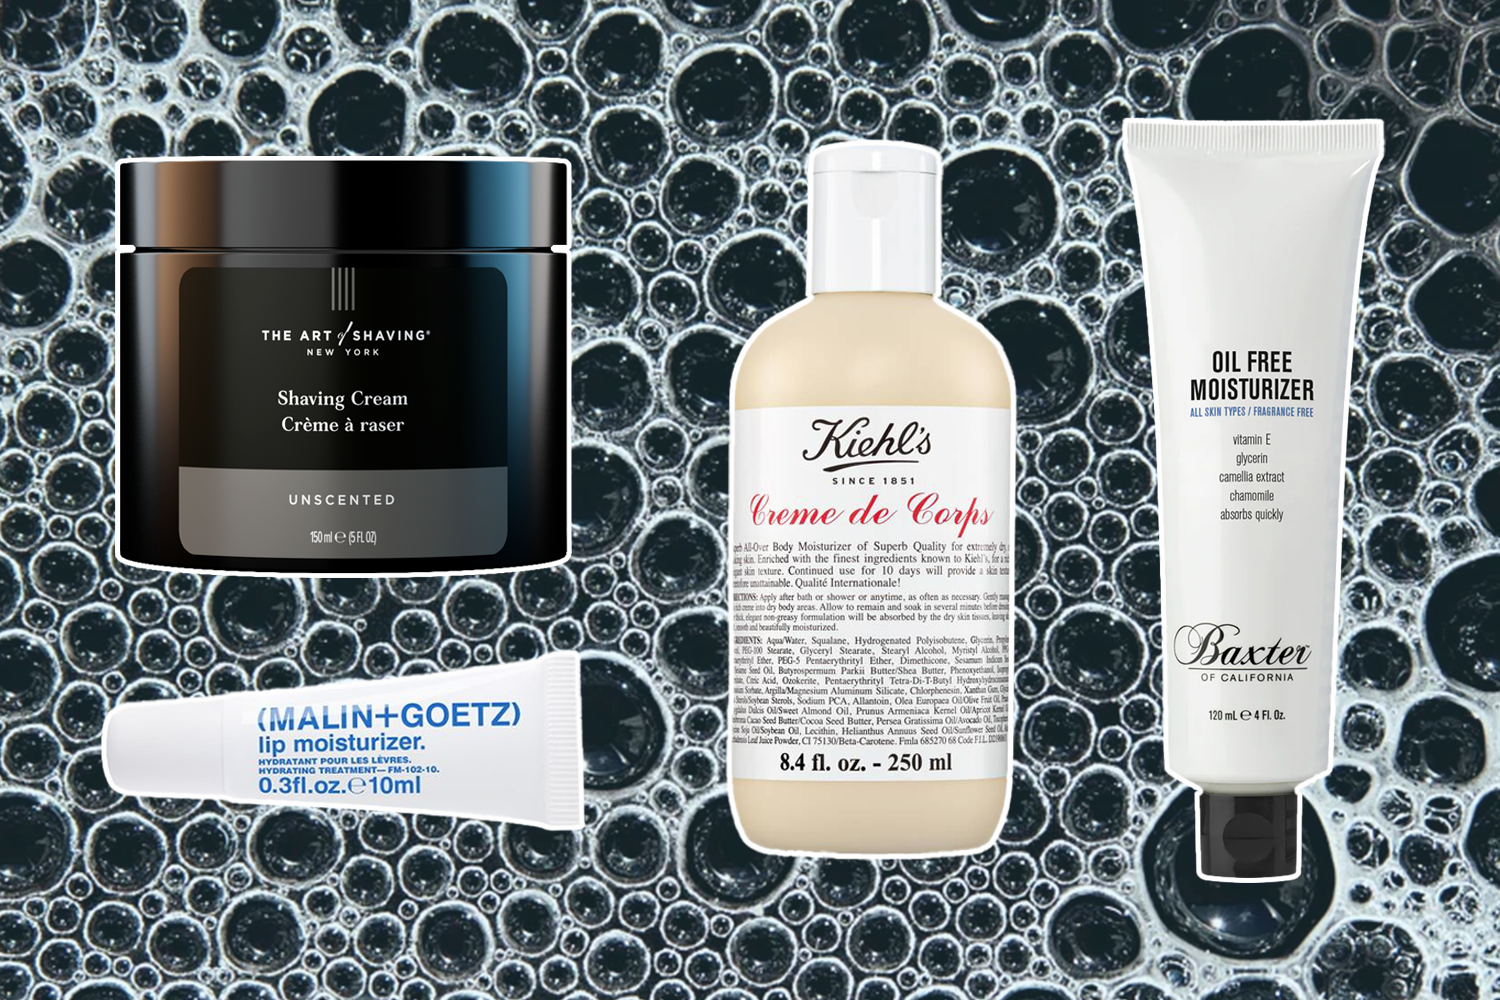 From Kiehls to Malin+Goetz these are the 10 best unscented grooming products.